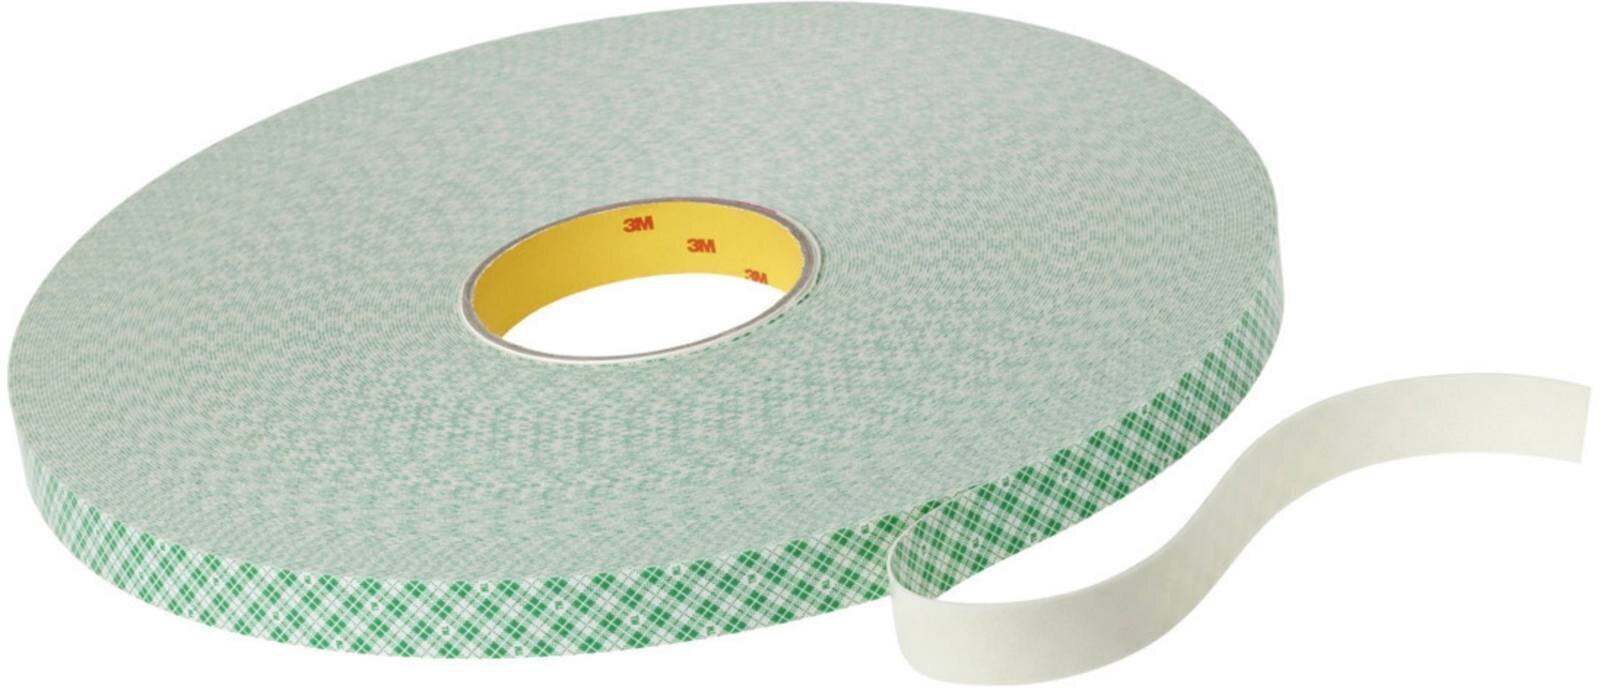 3M PU foam adhesive tape with acrylic adhesive 4032, beige, 15 mm x 66 m, 0.8 mm